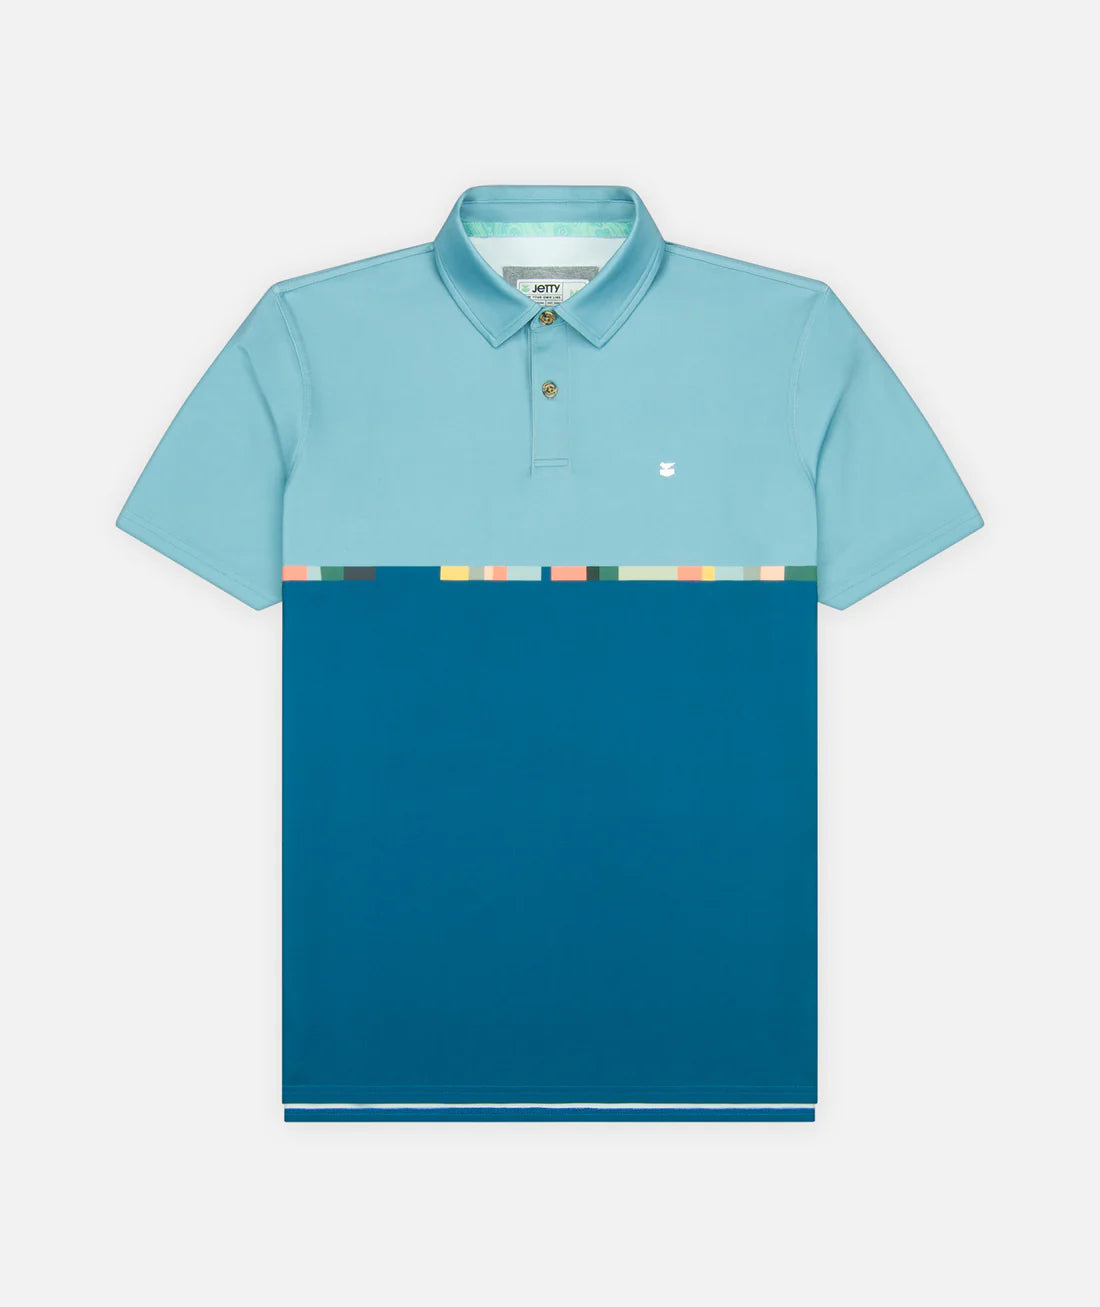 Jetty's Bunker Golf Polo in the color Blue